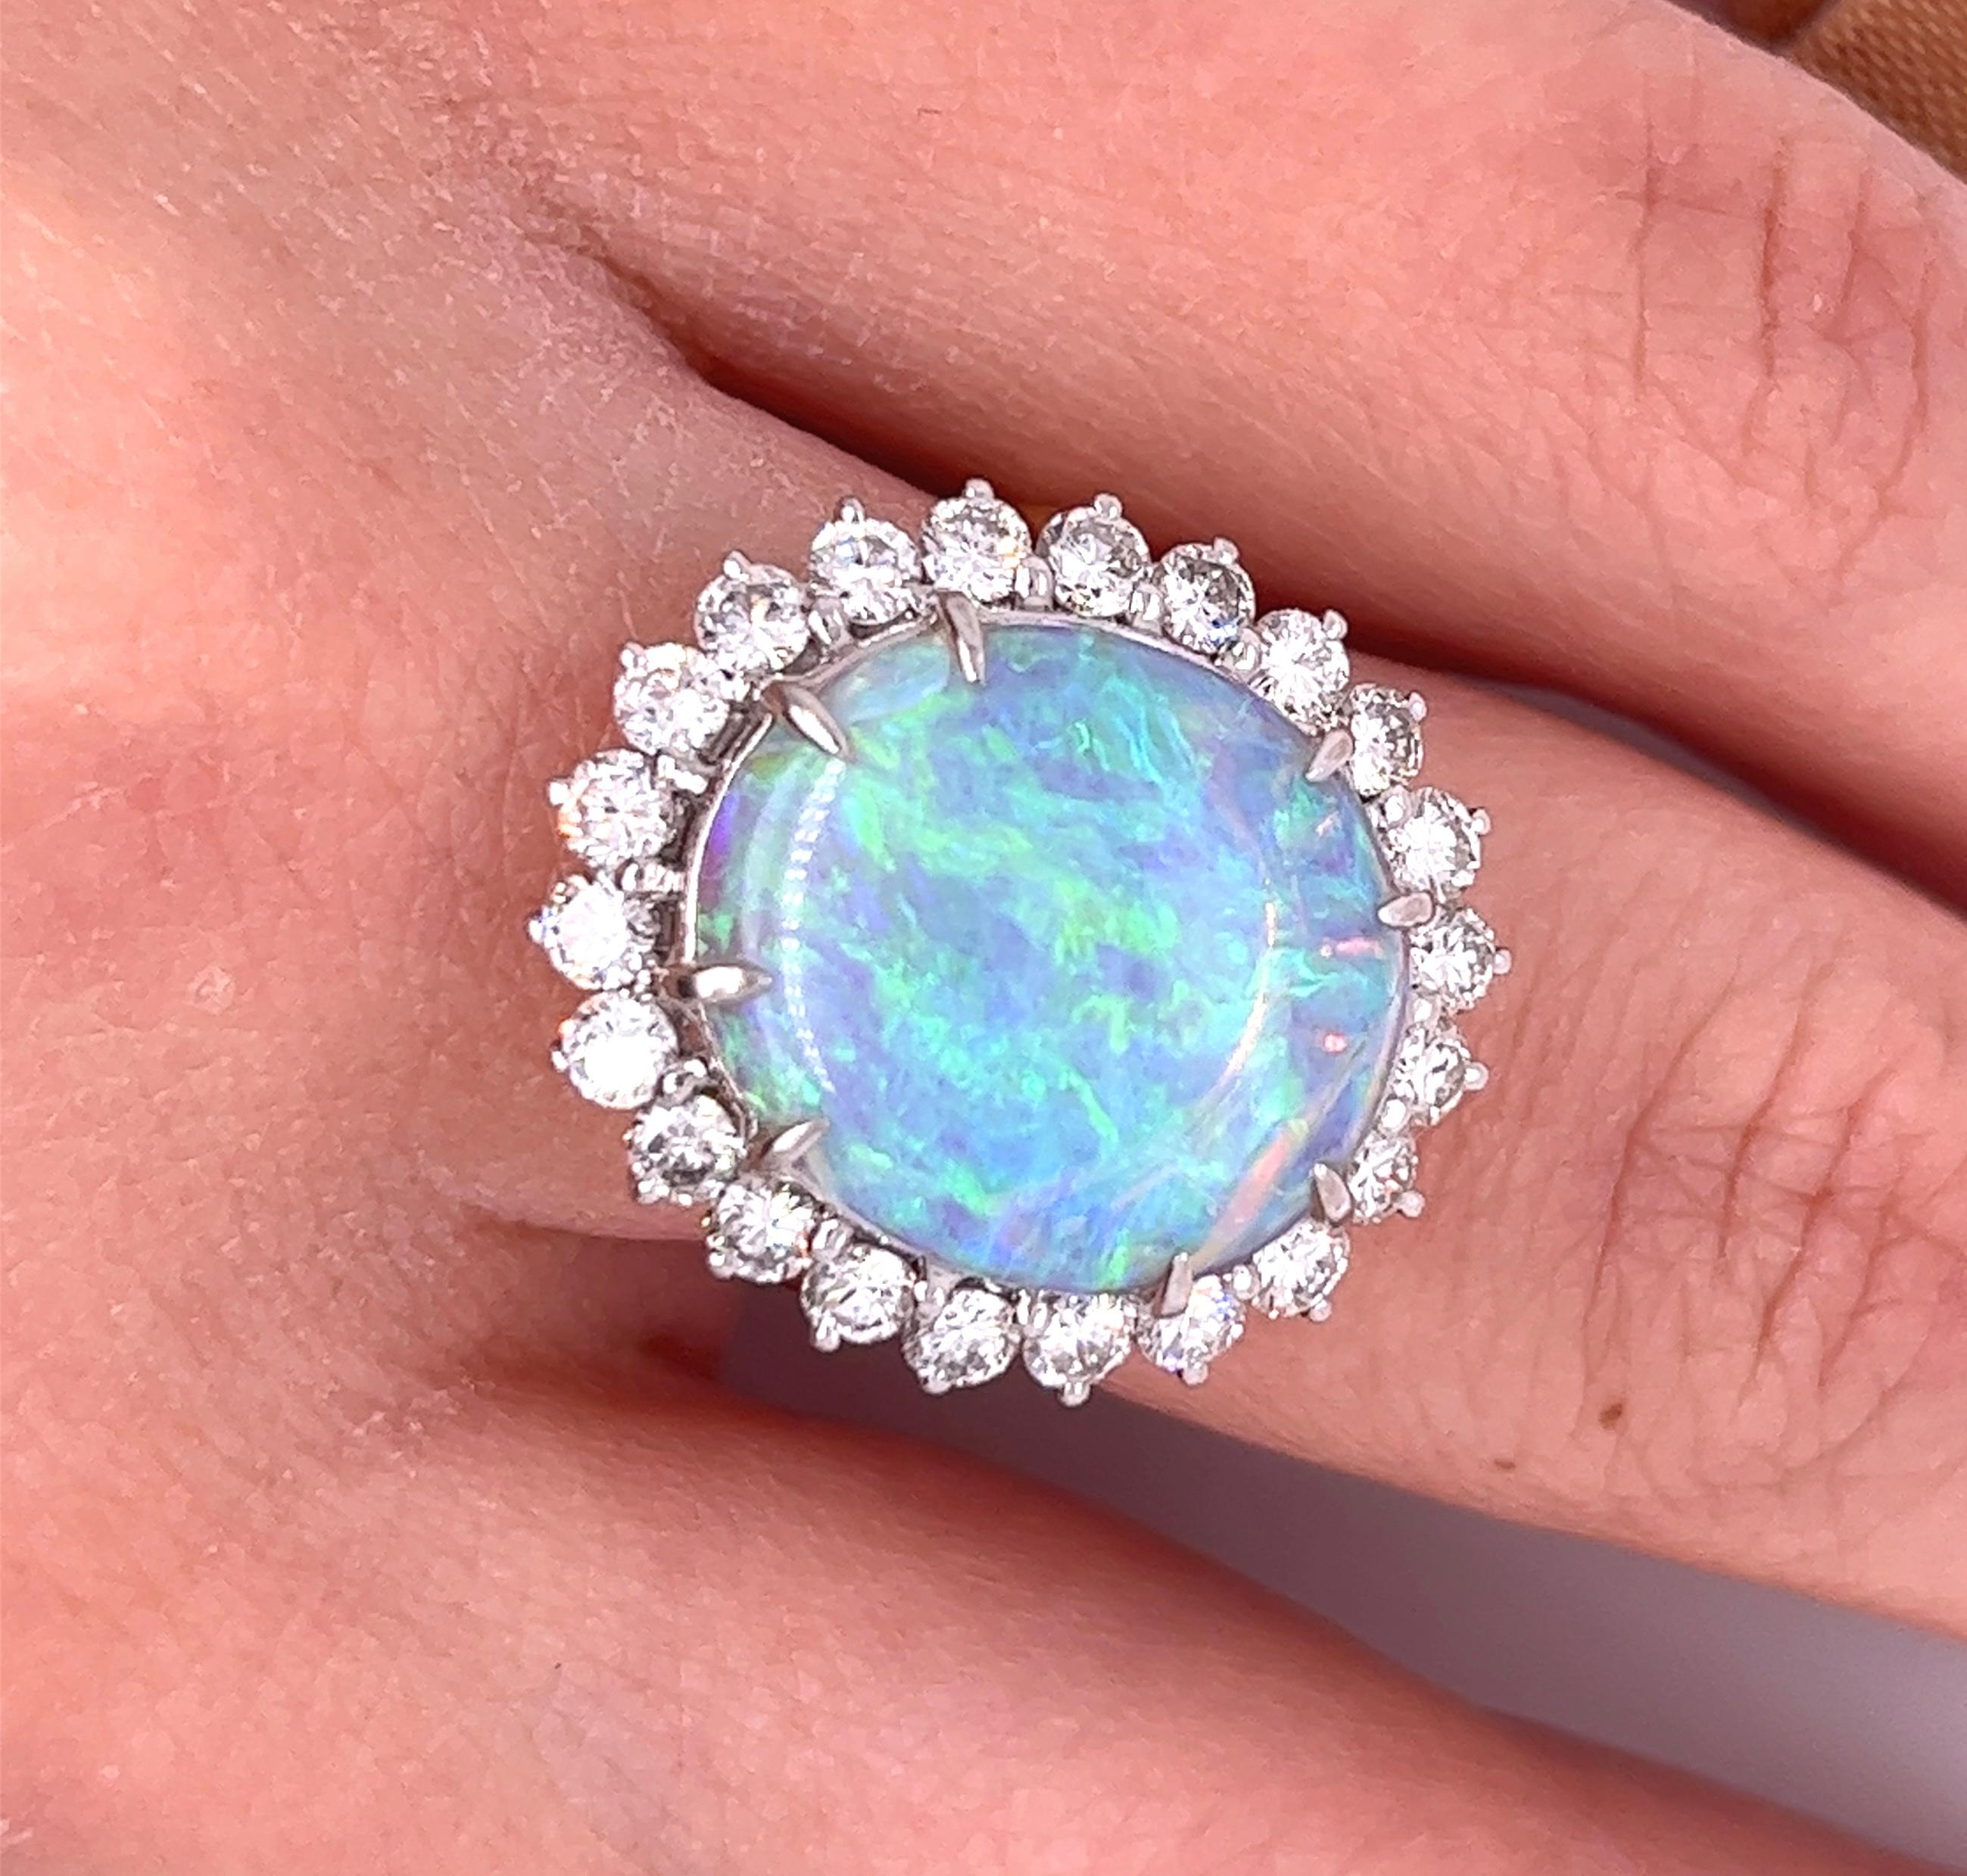 GIA certified 4.09-carat white opal with a vibrant array of colors. This Opal comes from the mines in Australia and is cabochon cut to perfection. 
The Opal is mounted in a thin, but sturdy, 18k yellow gold ring shank that integrates with a platinum